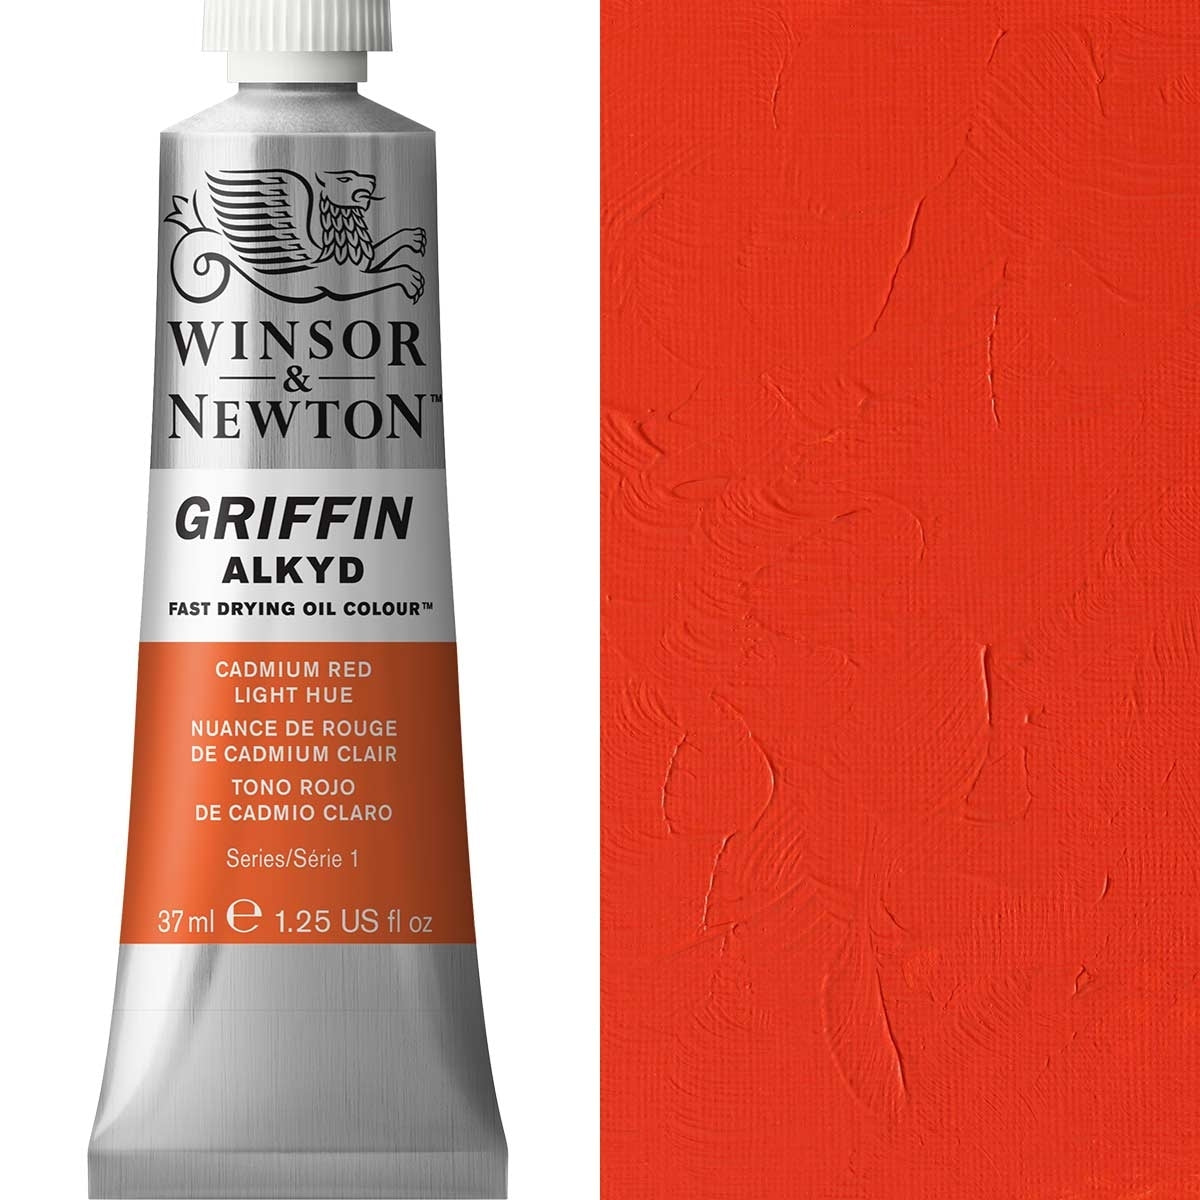 Winsor e Newton - Griffin Alkyd Oil Color - 37ml - CADMIUM Red Light Hue